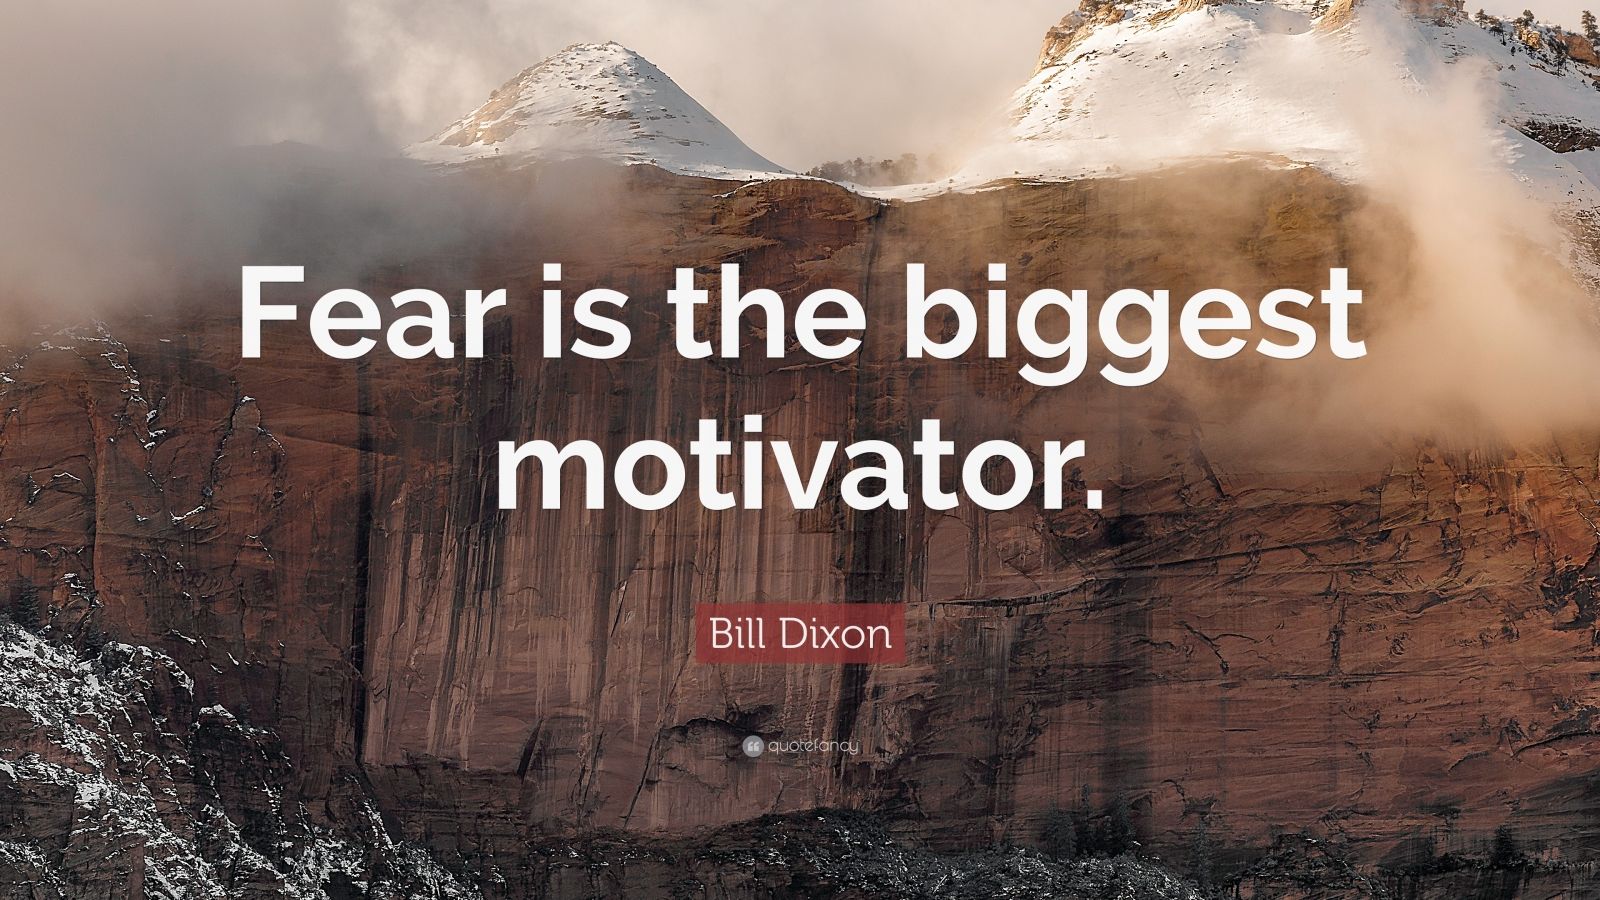 Bill Dixon Quote: “Fear is the biggest motivator.” (7 wallpapers